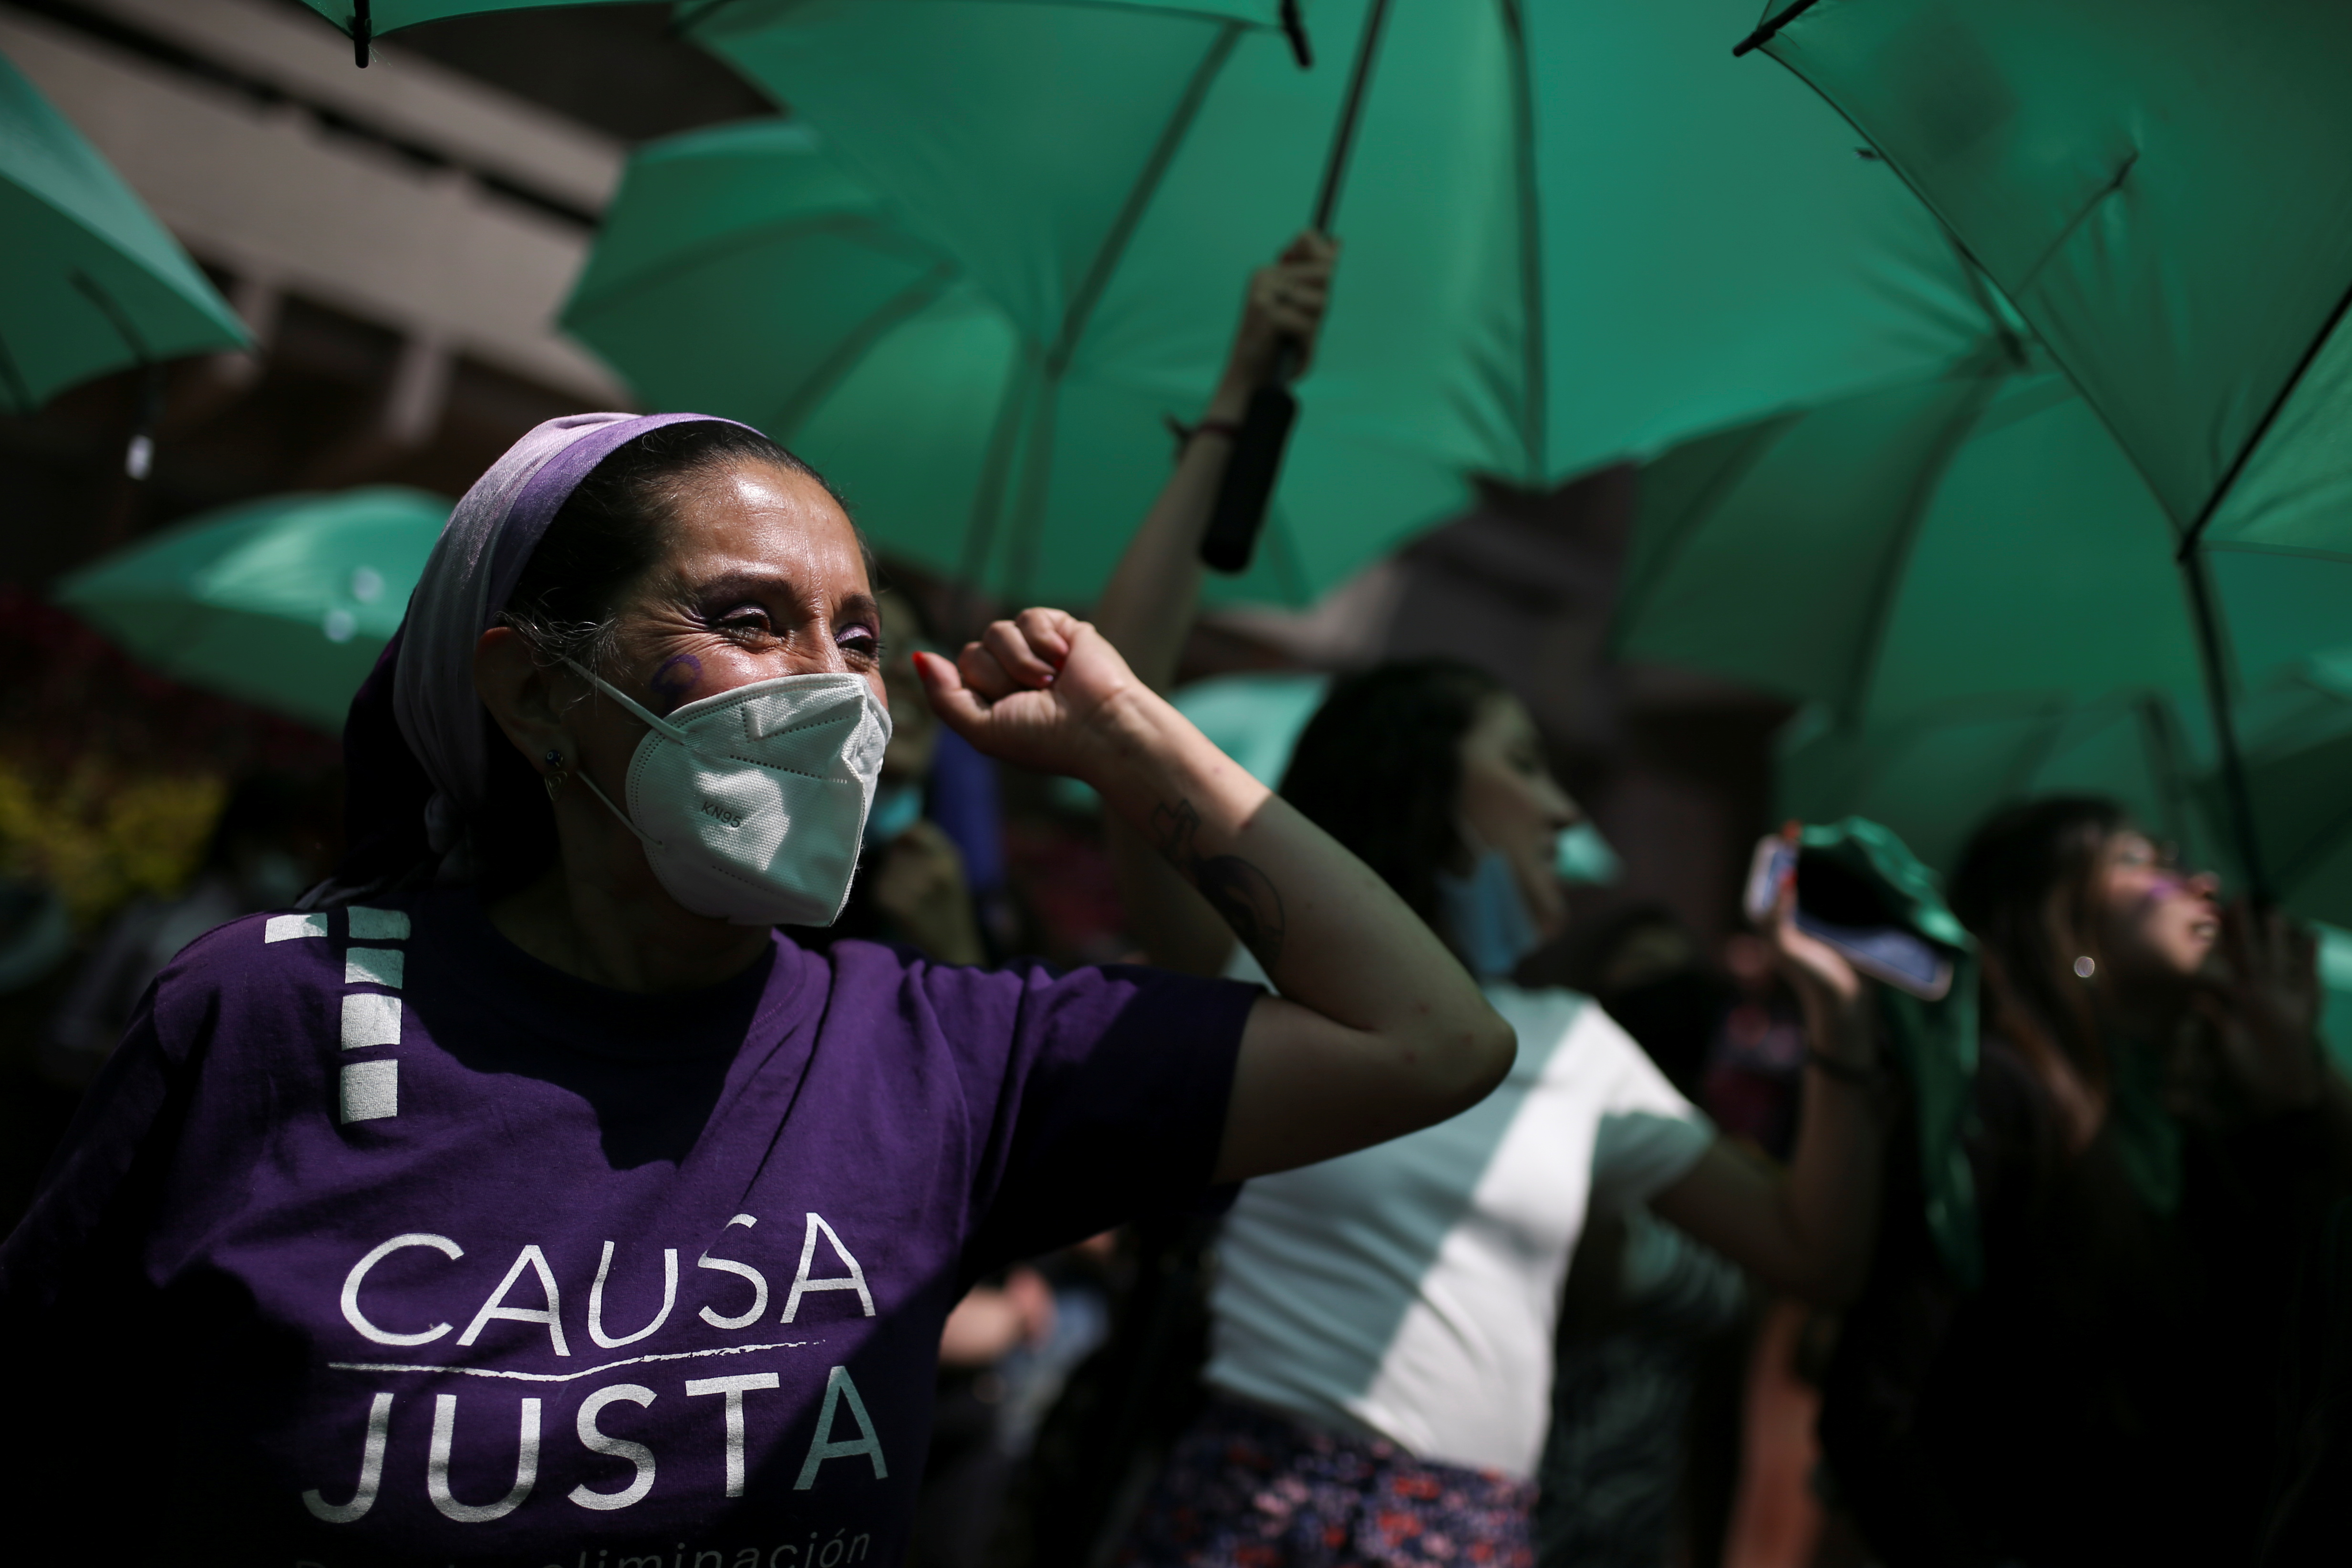 A woman wears a T-shirt reading "just cause" as women demonstrate in front of Colombia's constitutional court in support of removing abortion from the penal code, in Bogota, Colombia November 18, 2021. REUTERS/Luisa Gonzalez